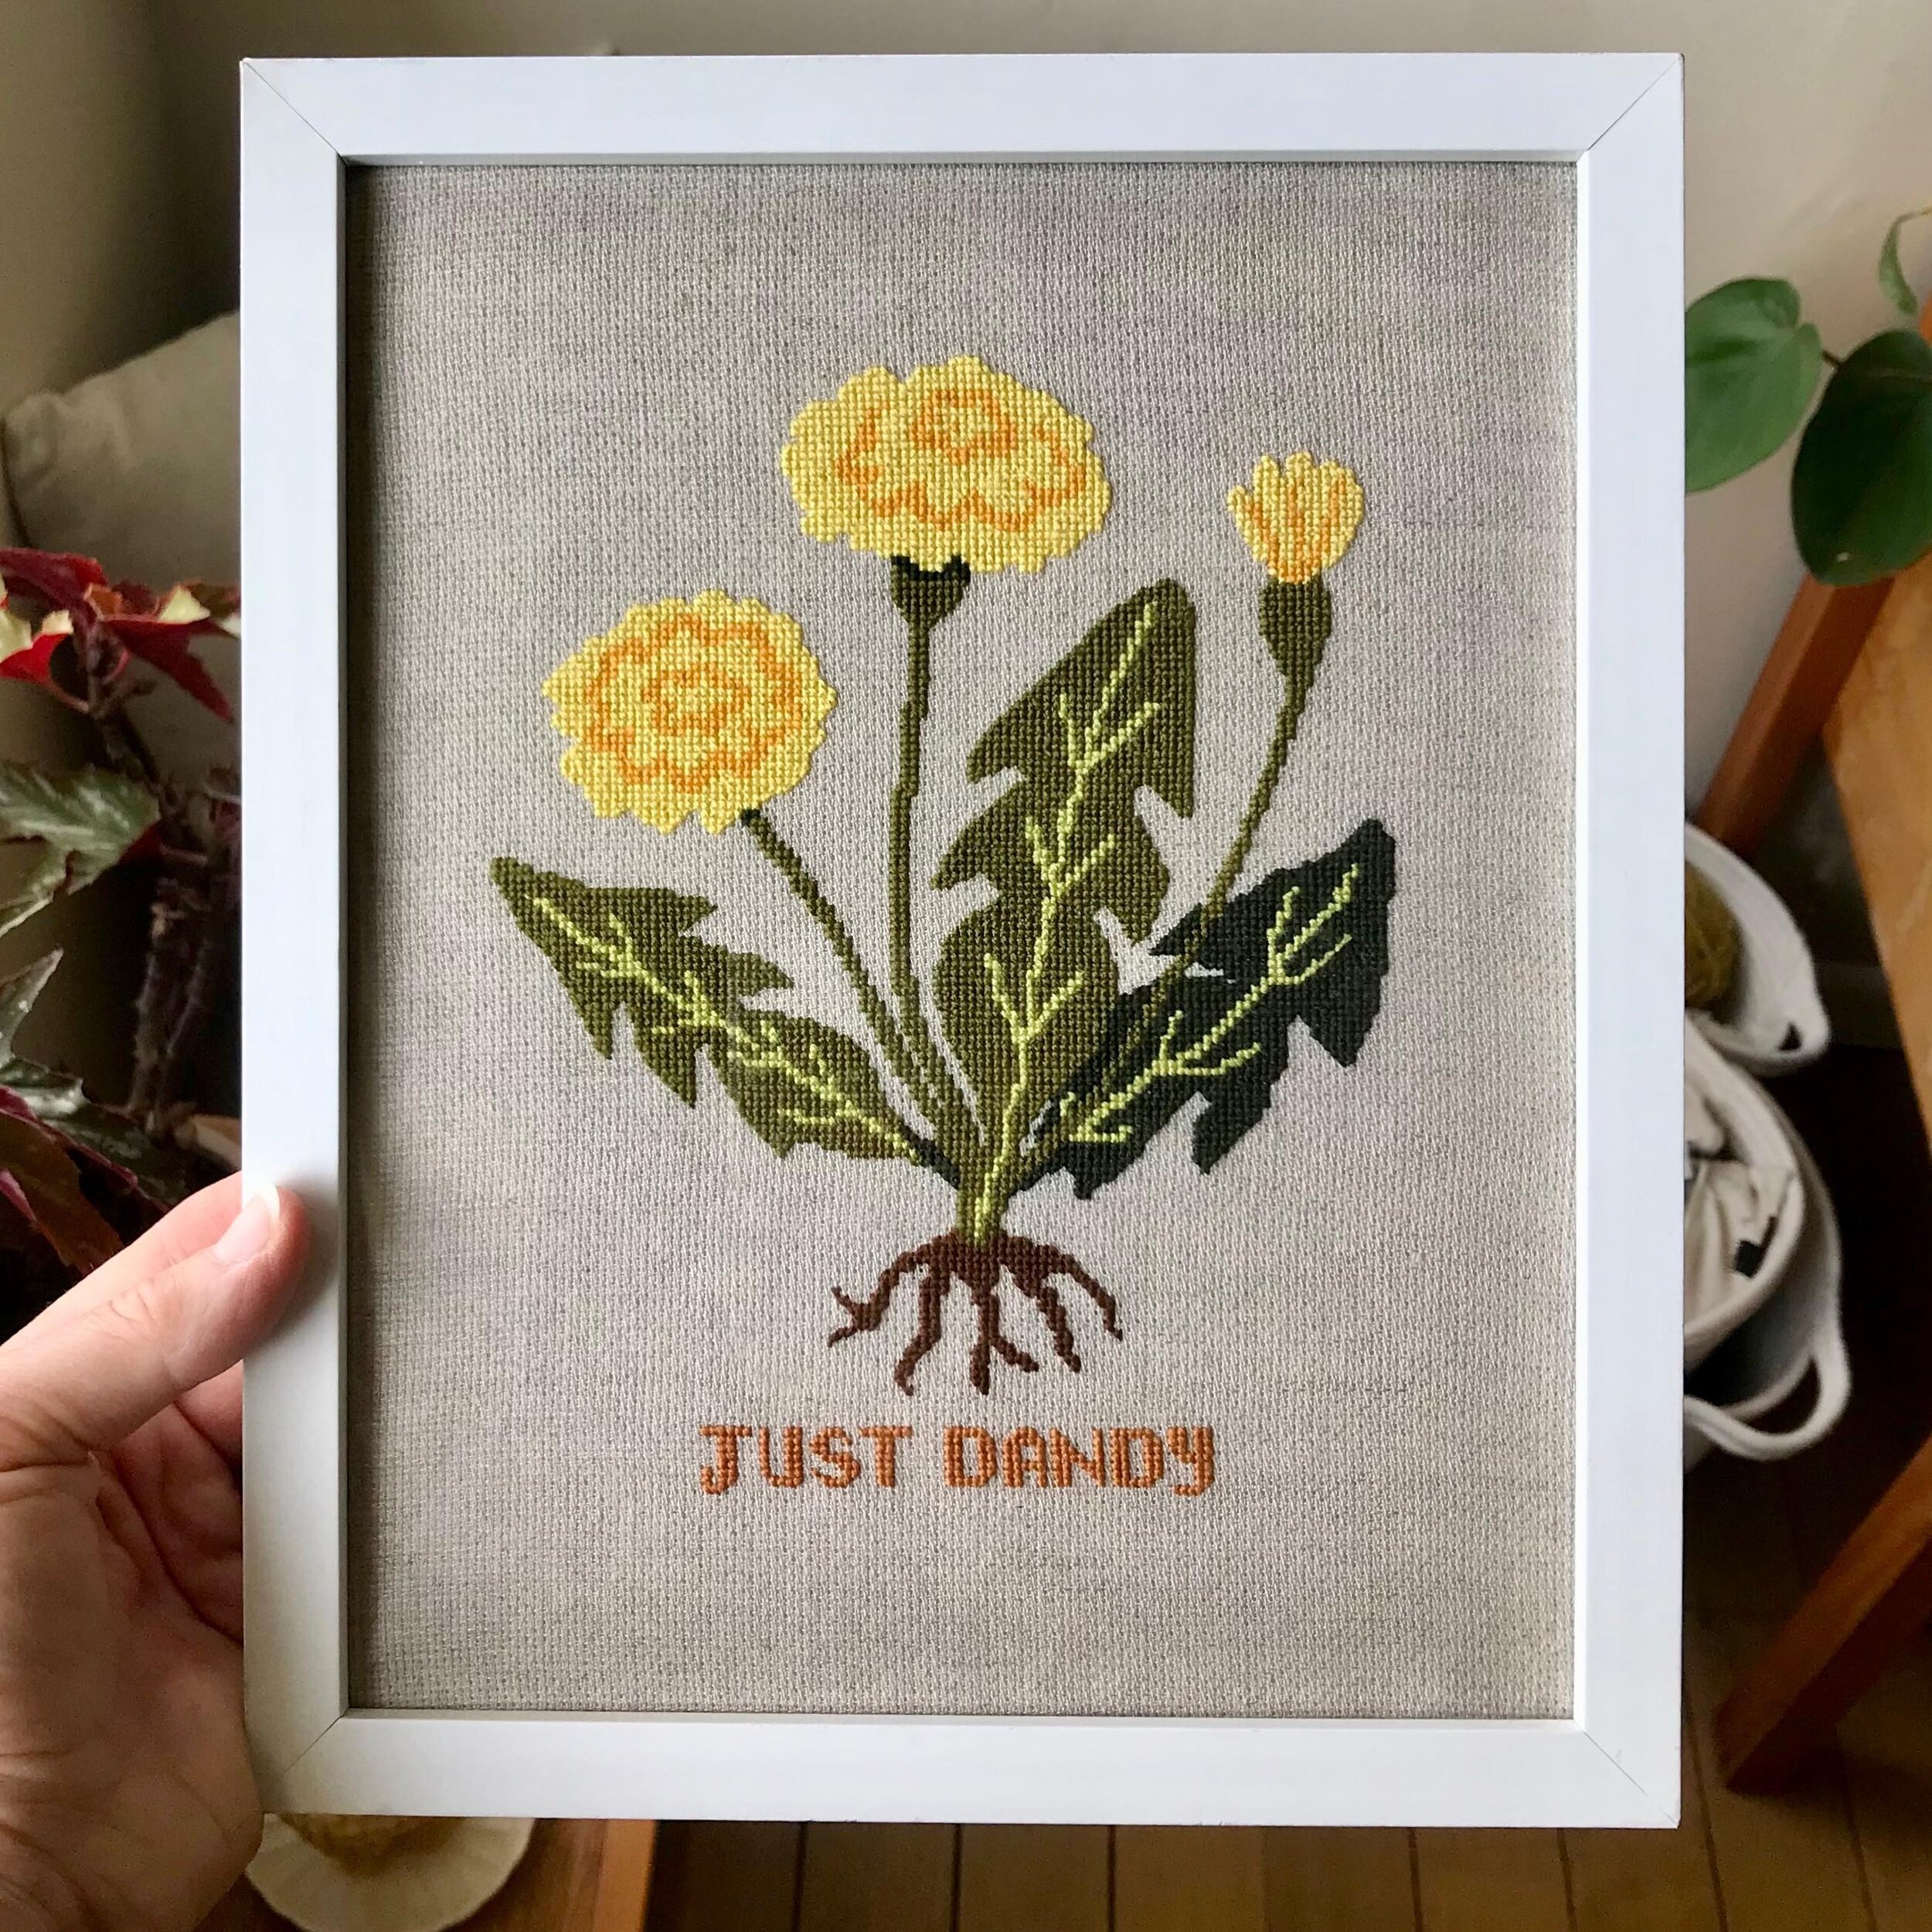 Finally finished this project just in time for marking student assignments next week. This was a dream to stitch. These dandelions are from a pattern by @sayhitoyourdogshop